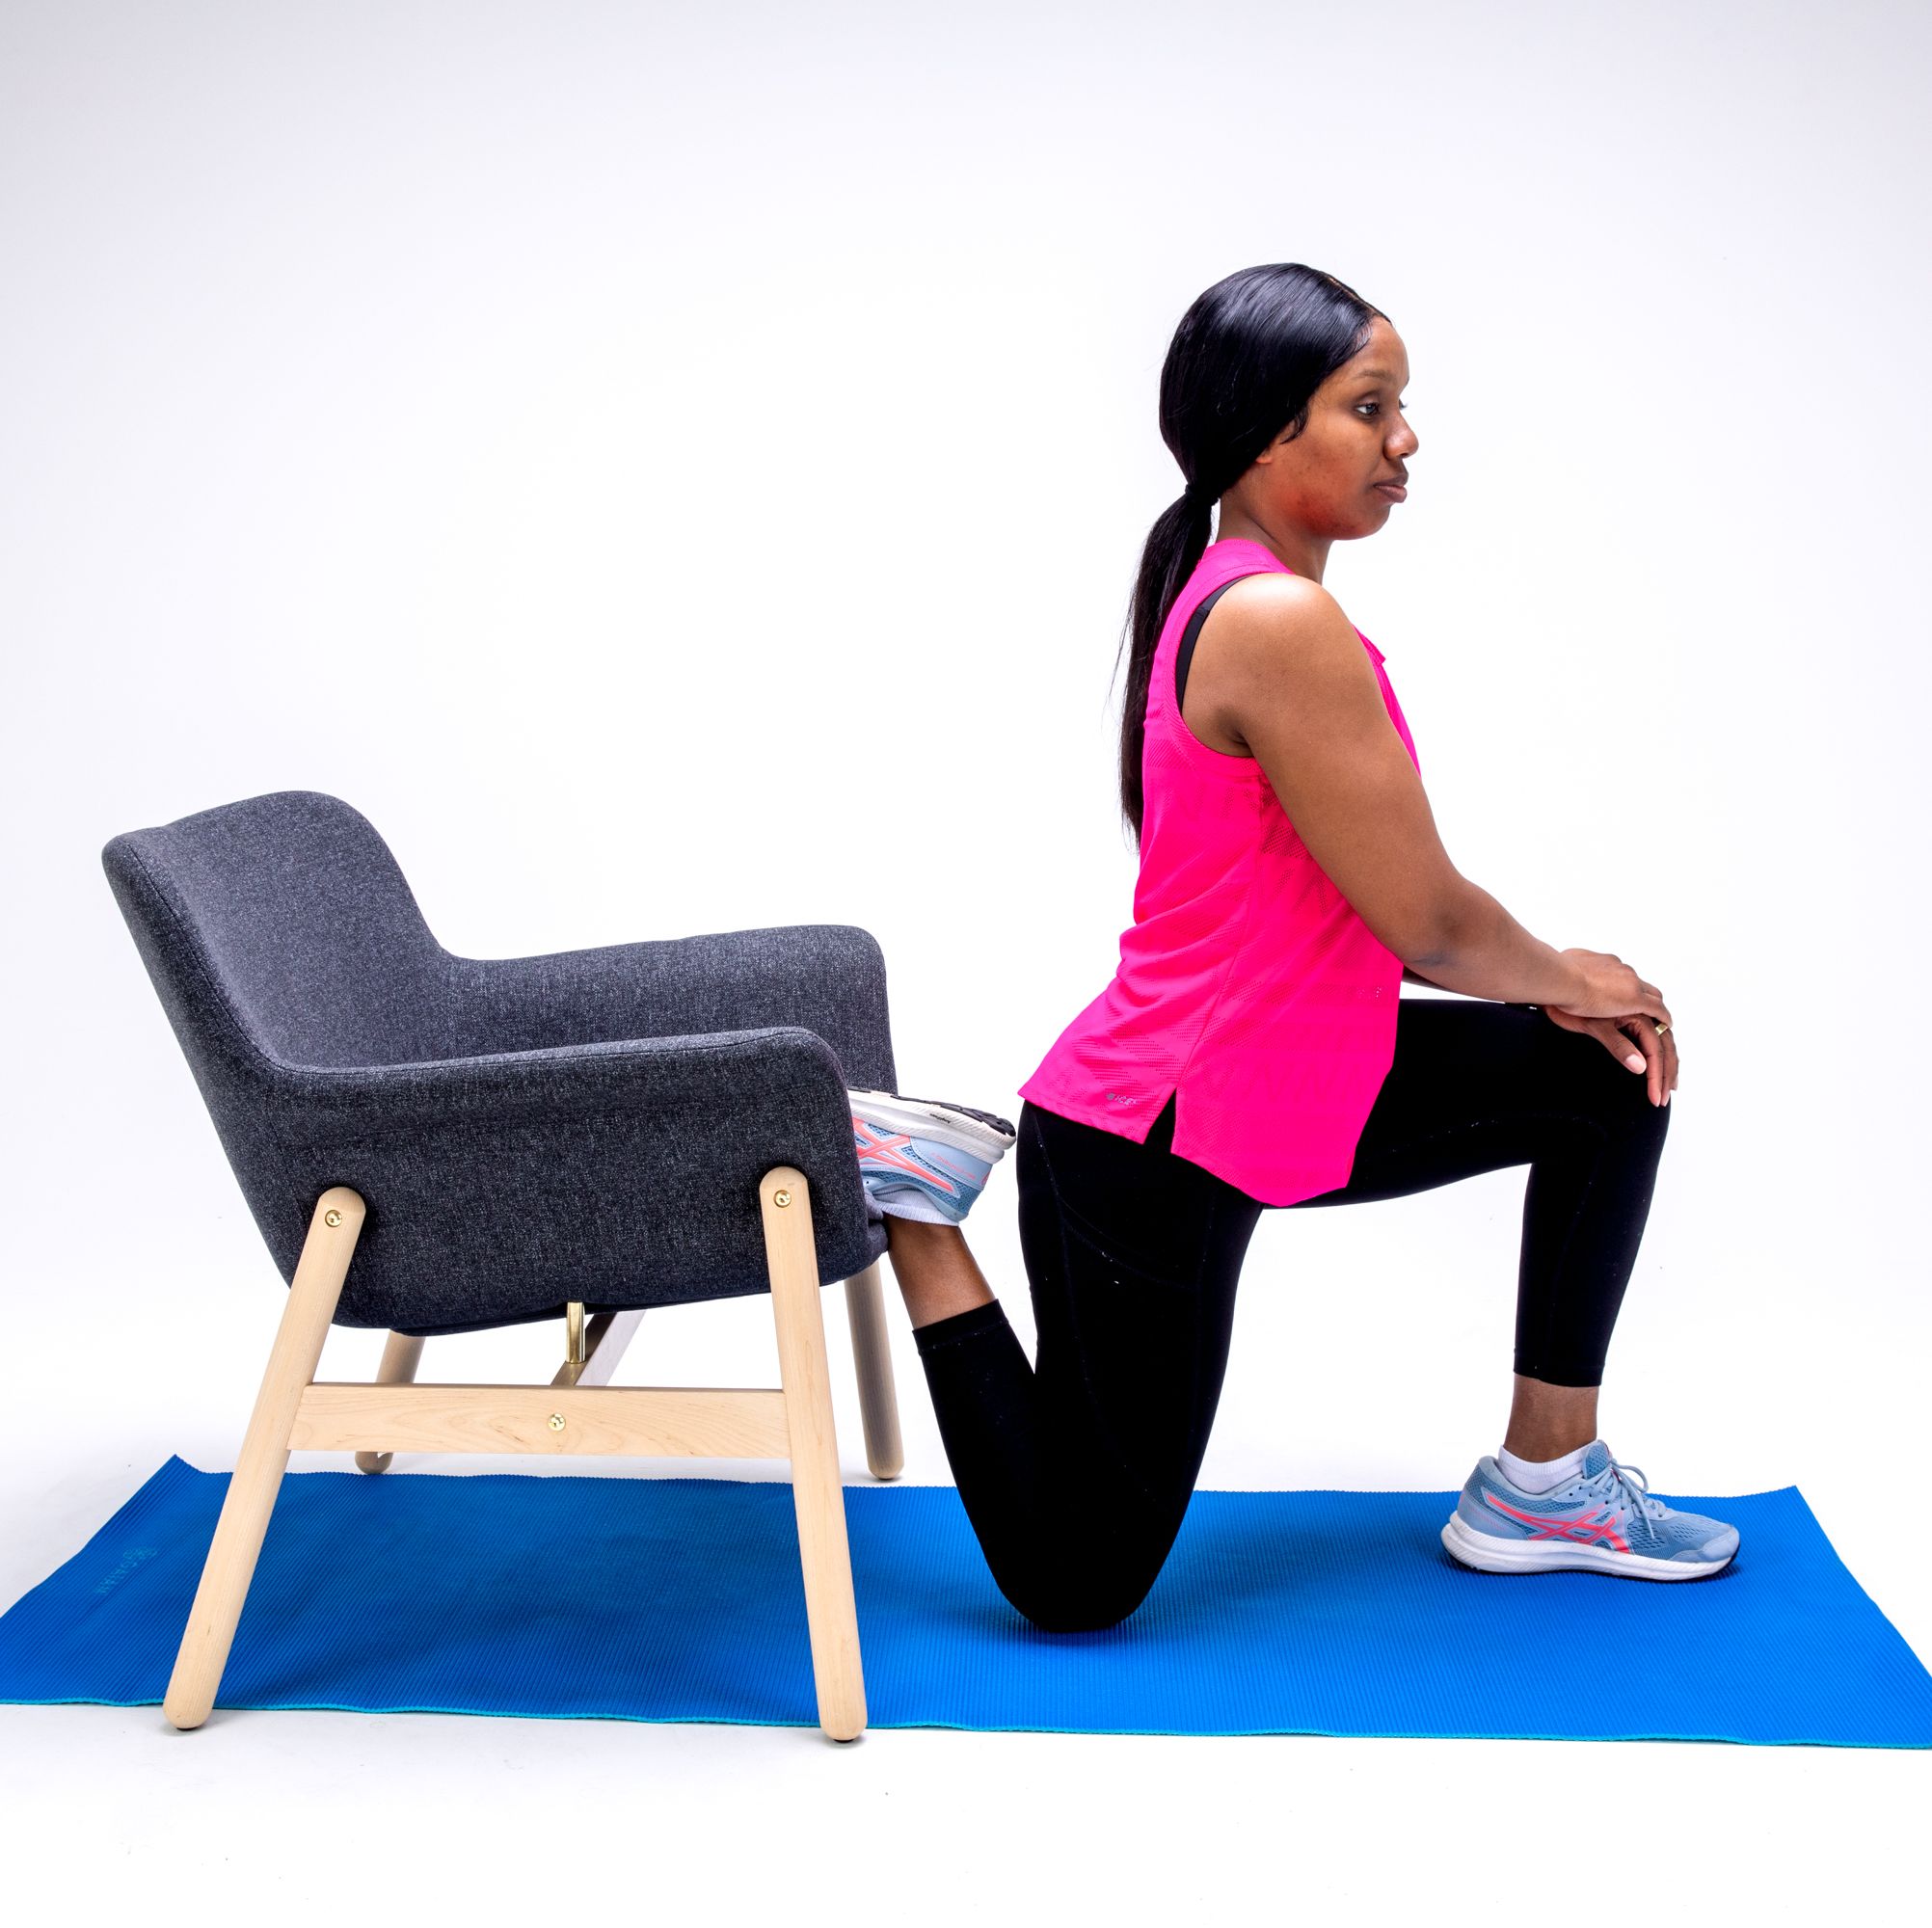 hip flexion exercises in a chair